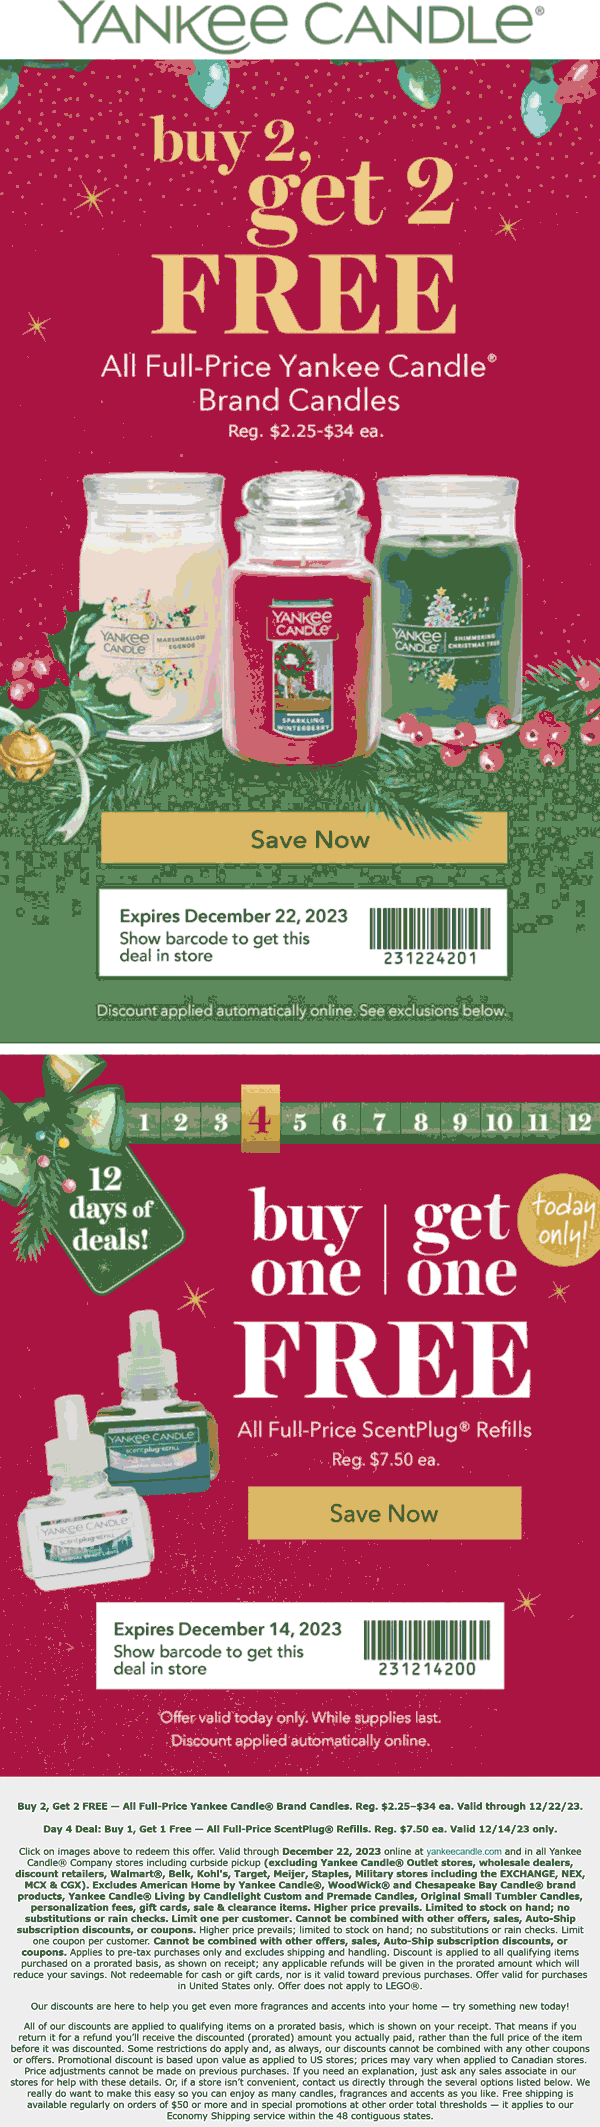 Yankee Candle stores Coupon  4-for-2 on candles at Yankee Candle, ditto online #yankeecandle 